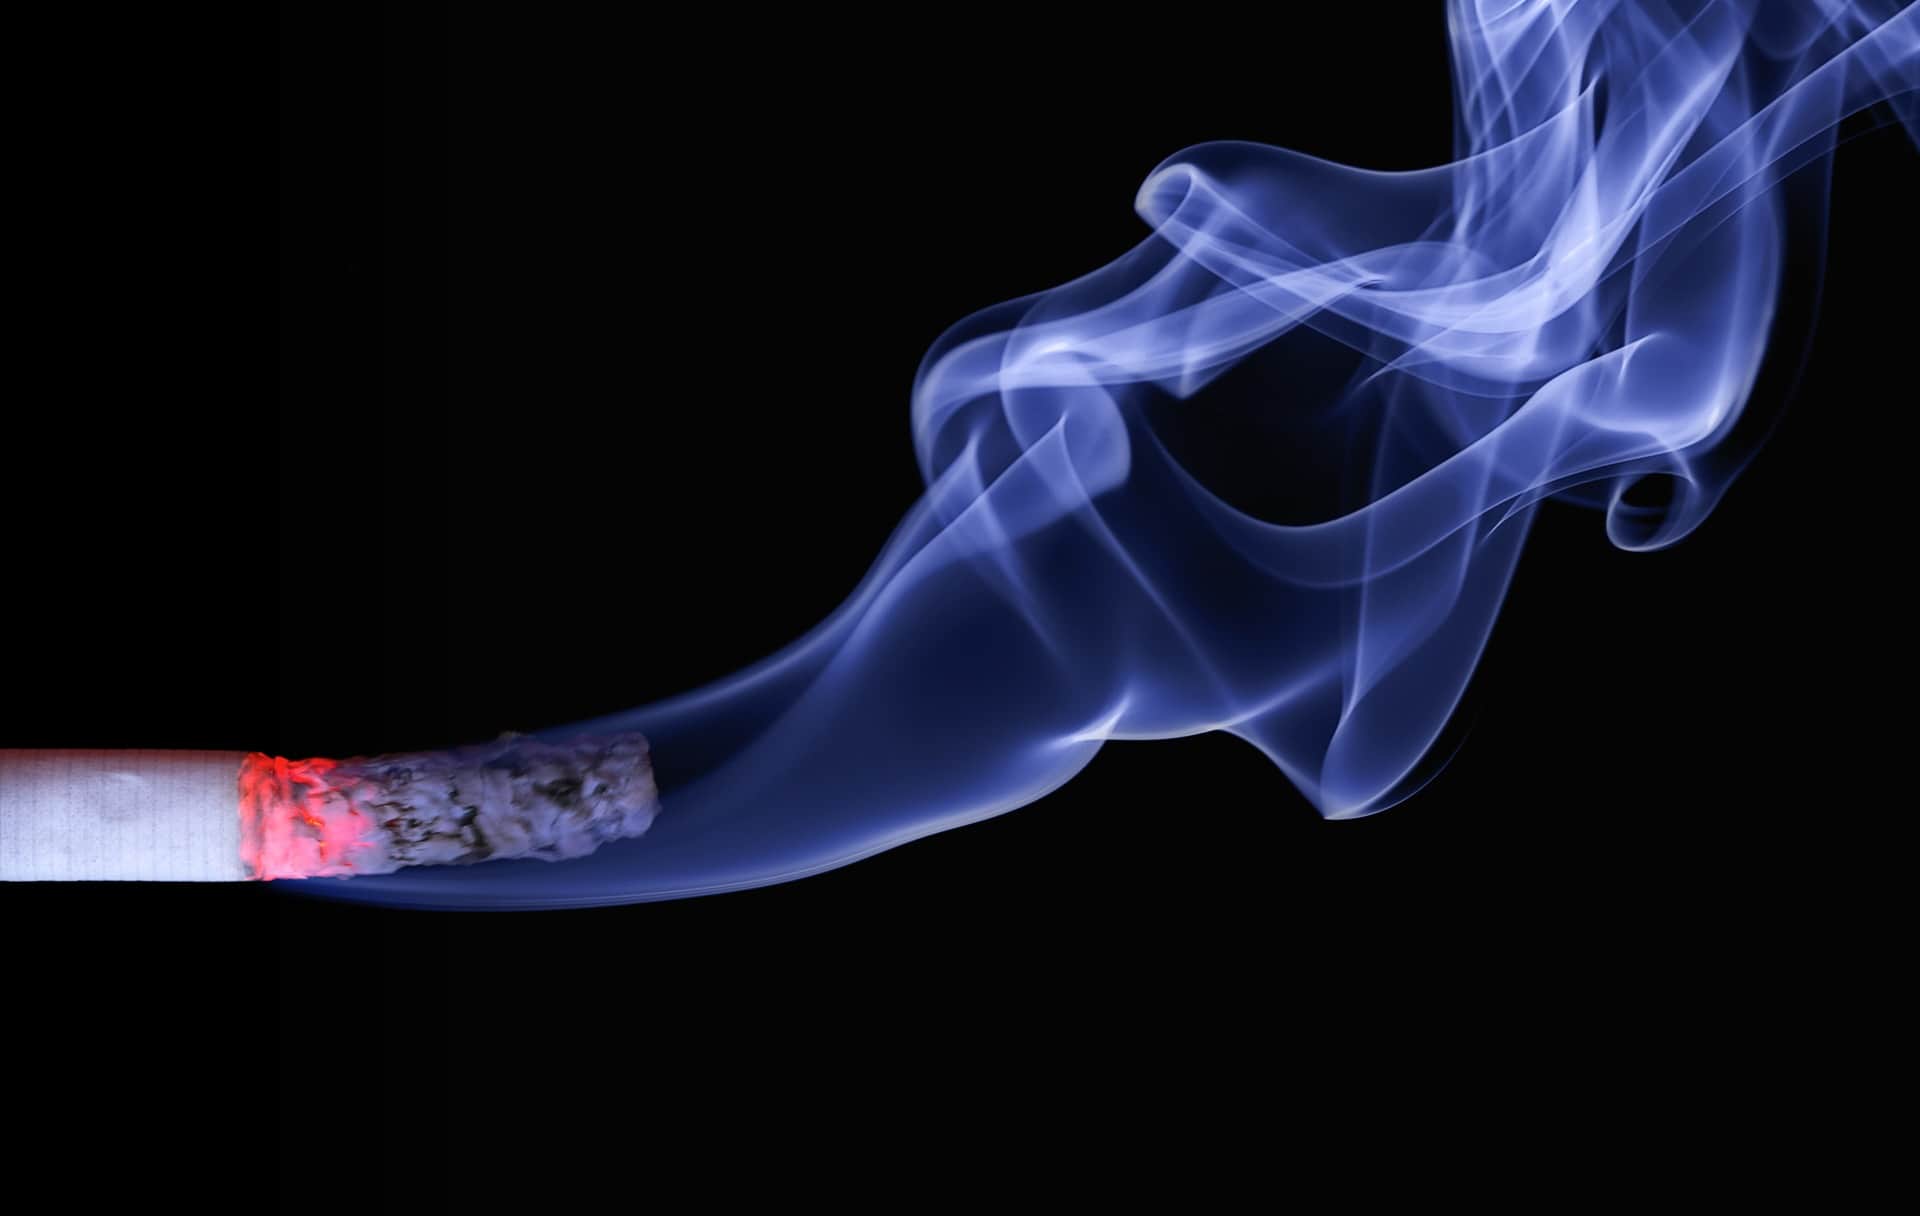 How Nicotine Can Hurt Your Recovery